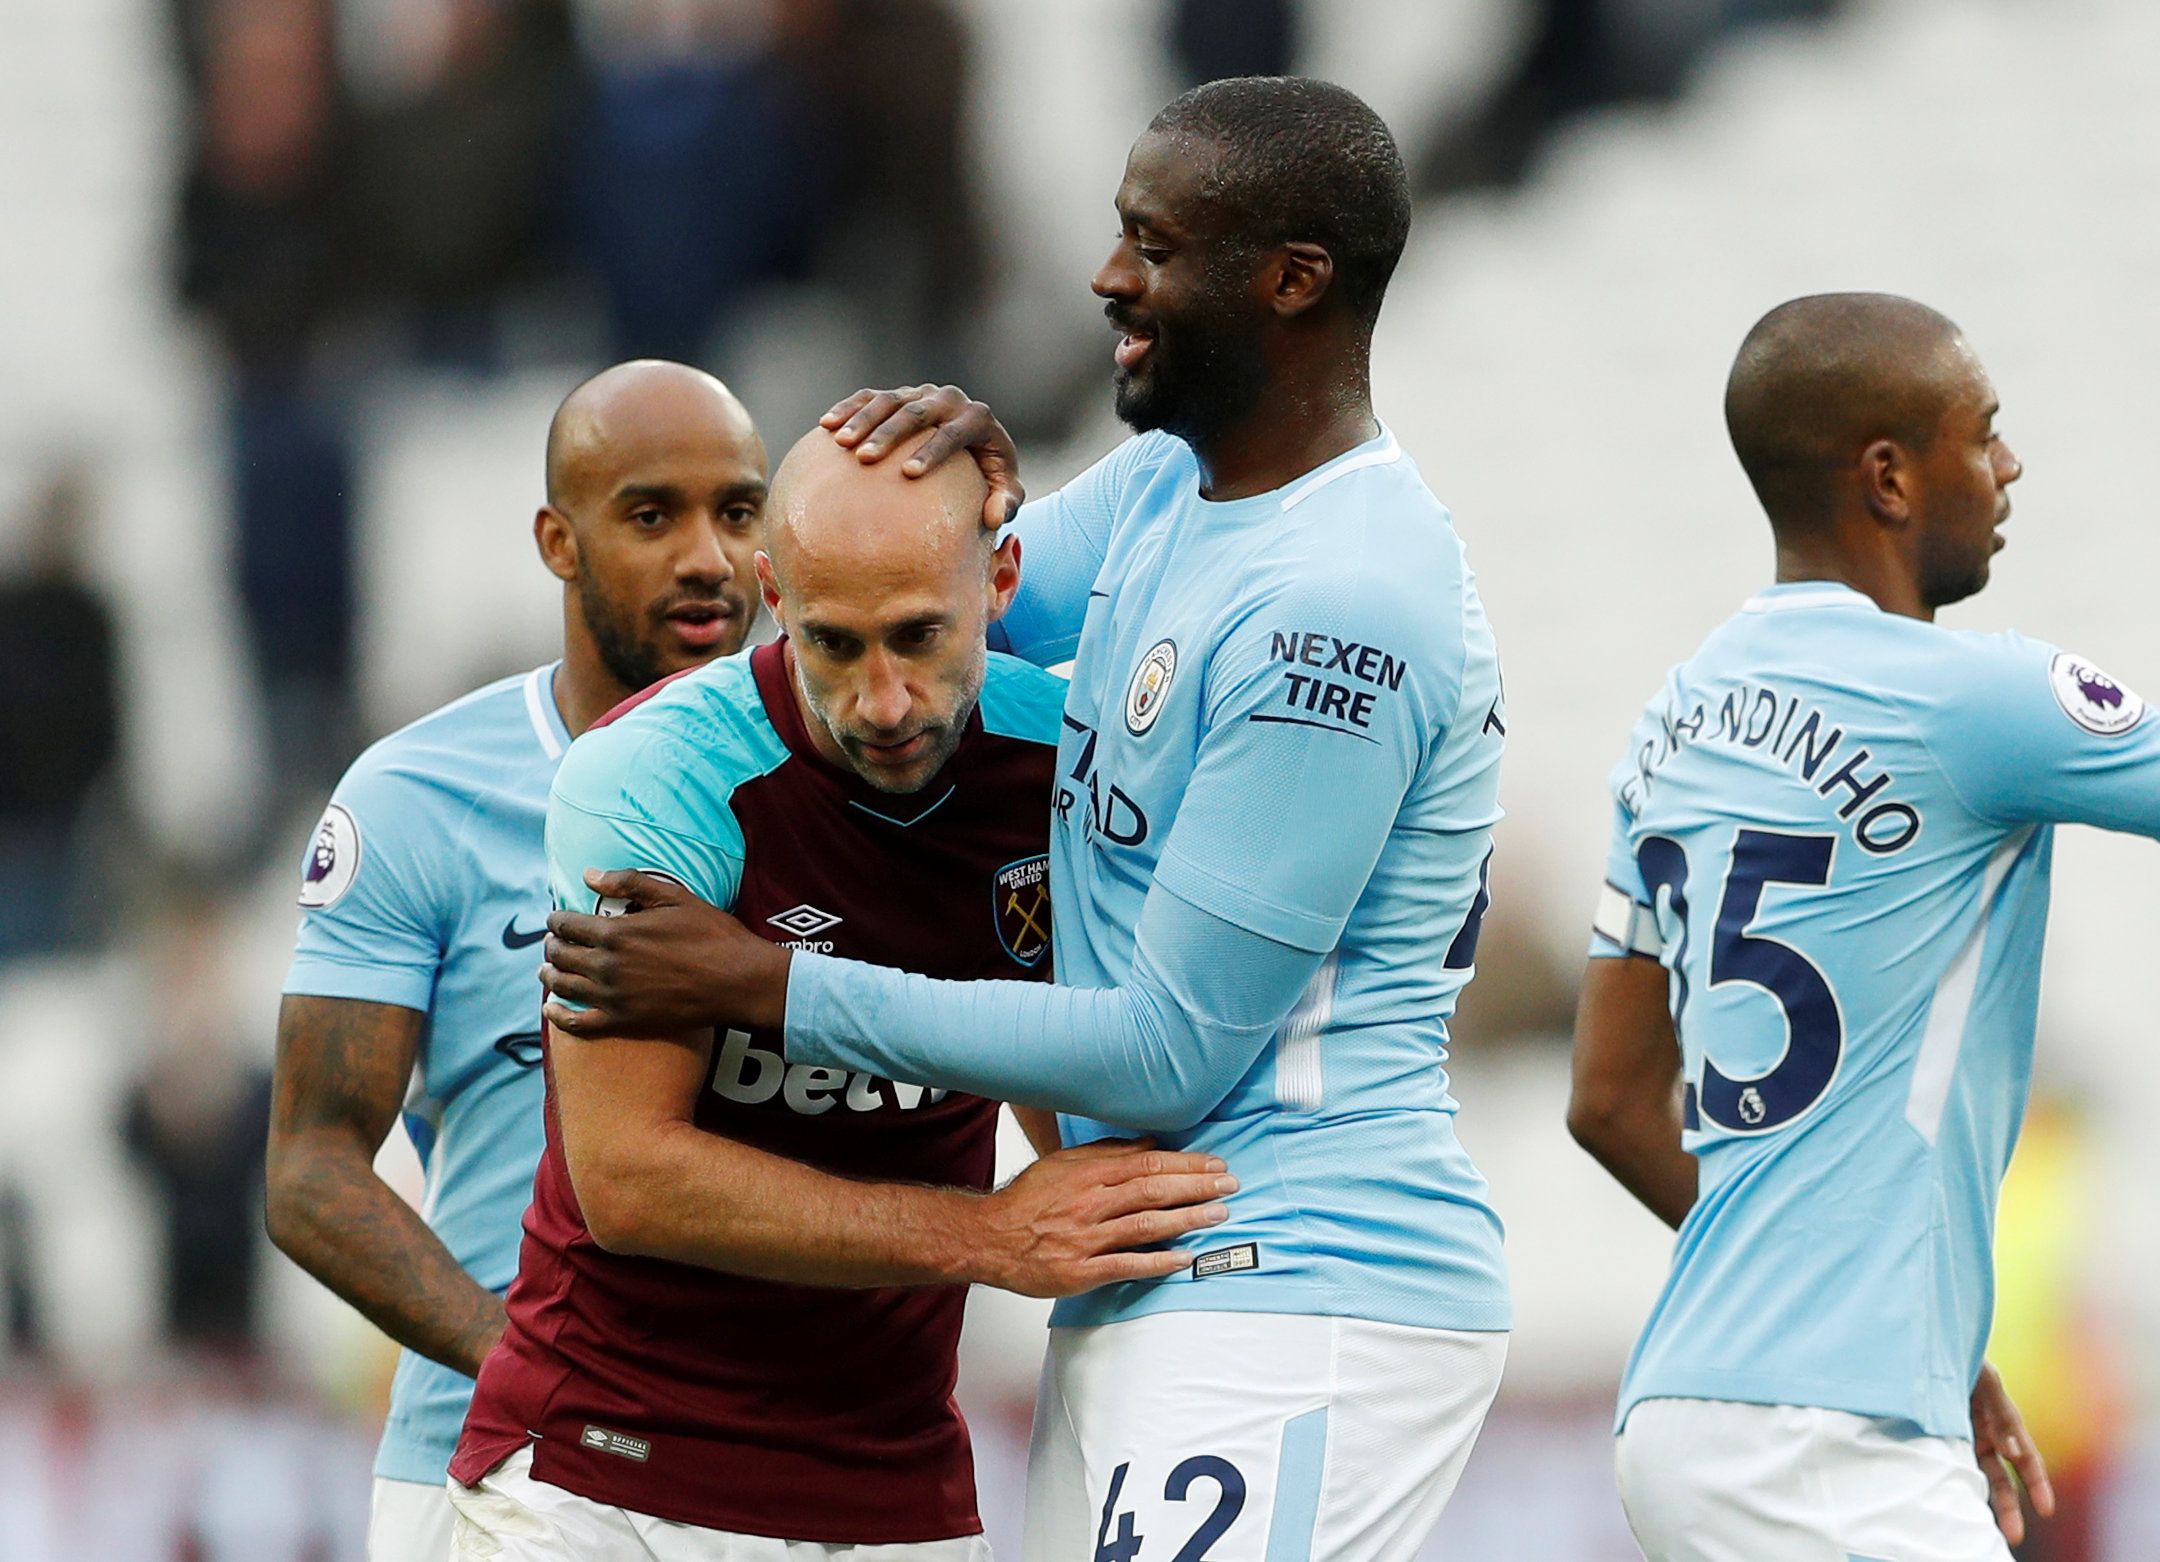 Soccer Football - Premier League - West Ham United v Manchester City - London Stadium, London, Britain - April 29, 2018   West Ham United's Pablo Zabaleta with Manchester City's Yaya Toure after the match   Action Images via Reuters/John Sibley    EDITORIAL USE ONLY. No use with unauthorized audio, video, data, fixture lists, club/league logos or 